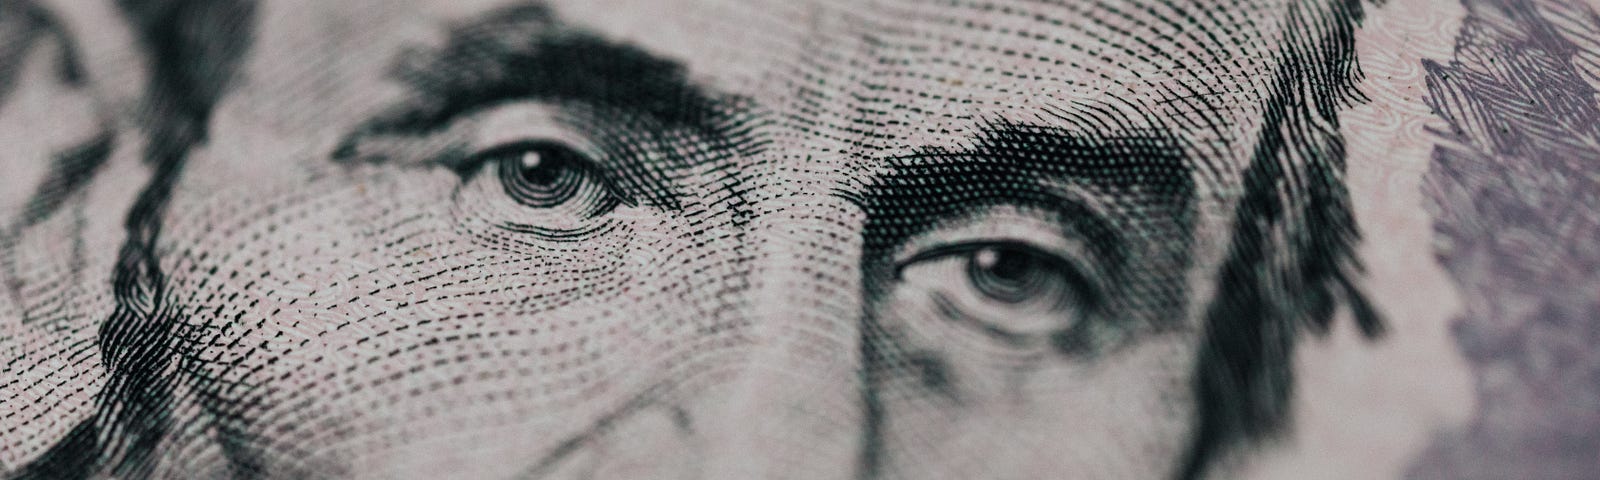 Picture of Abraham Lincoln’s eyes on the $5 bill.